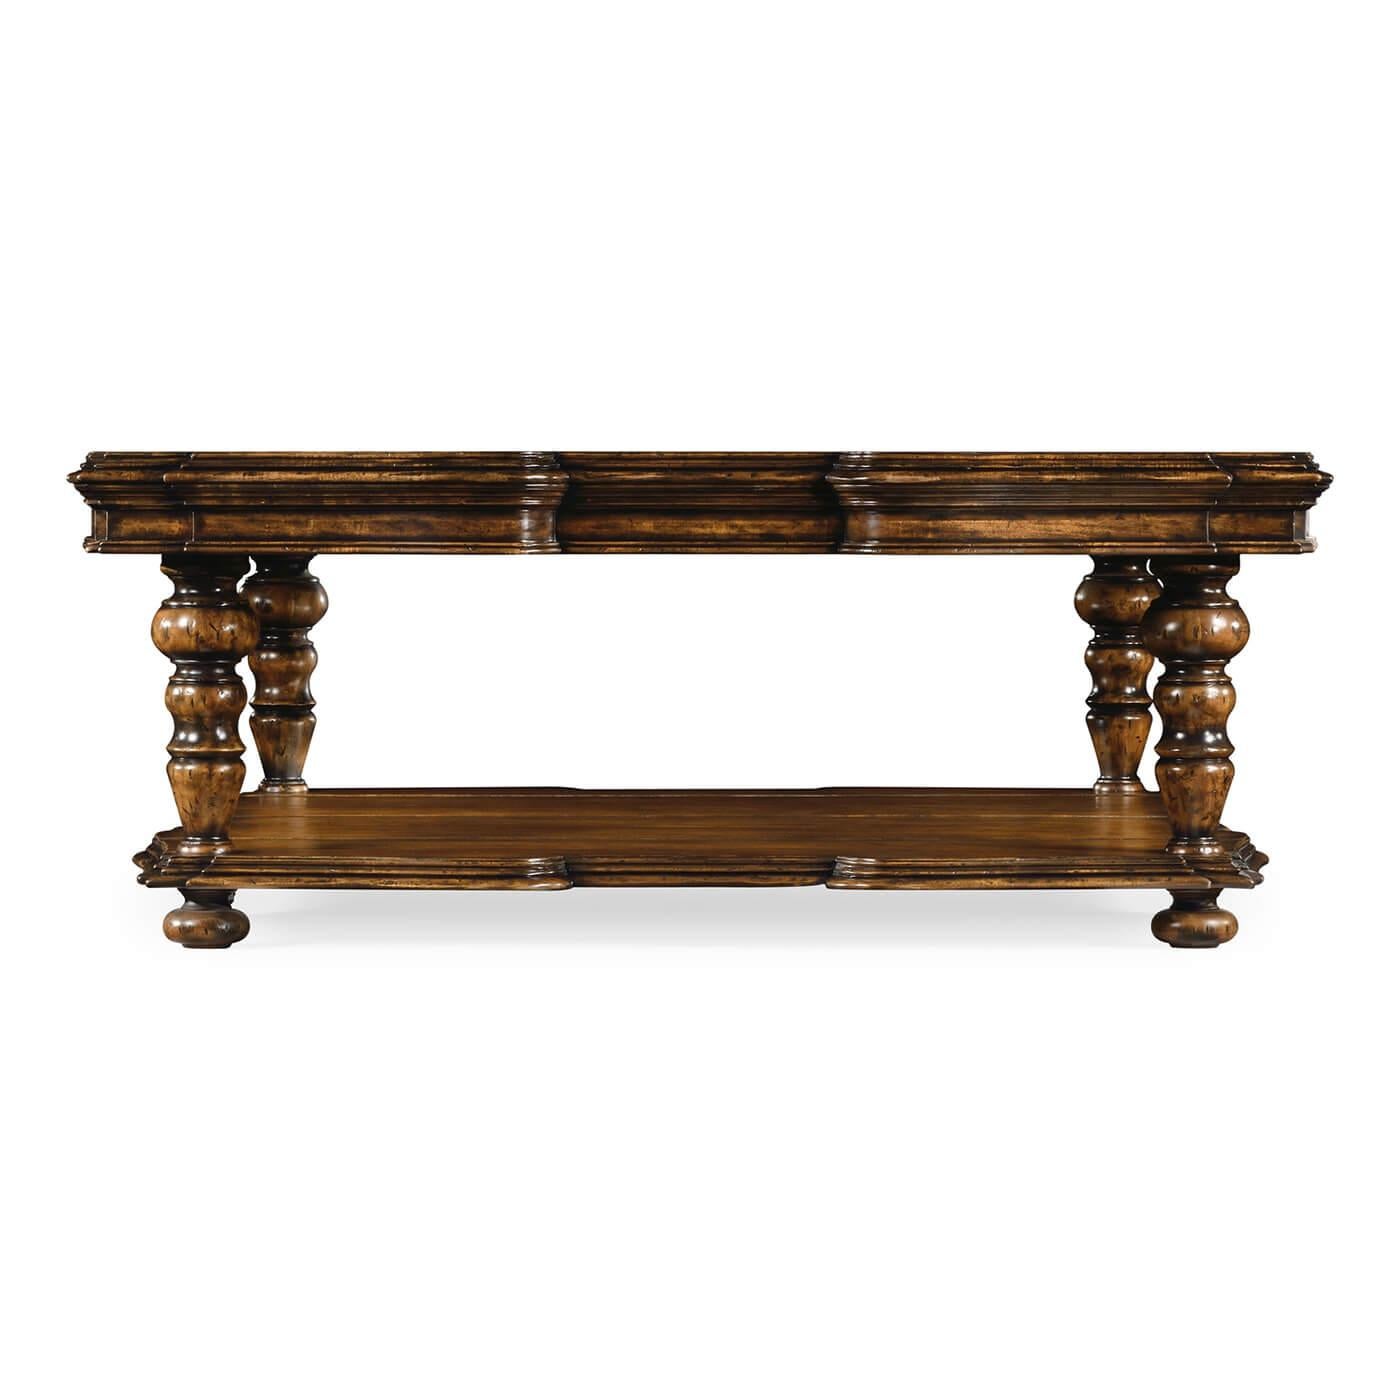 French Provincial Flemish Square Coffee Table